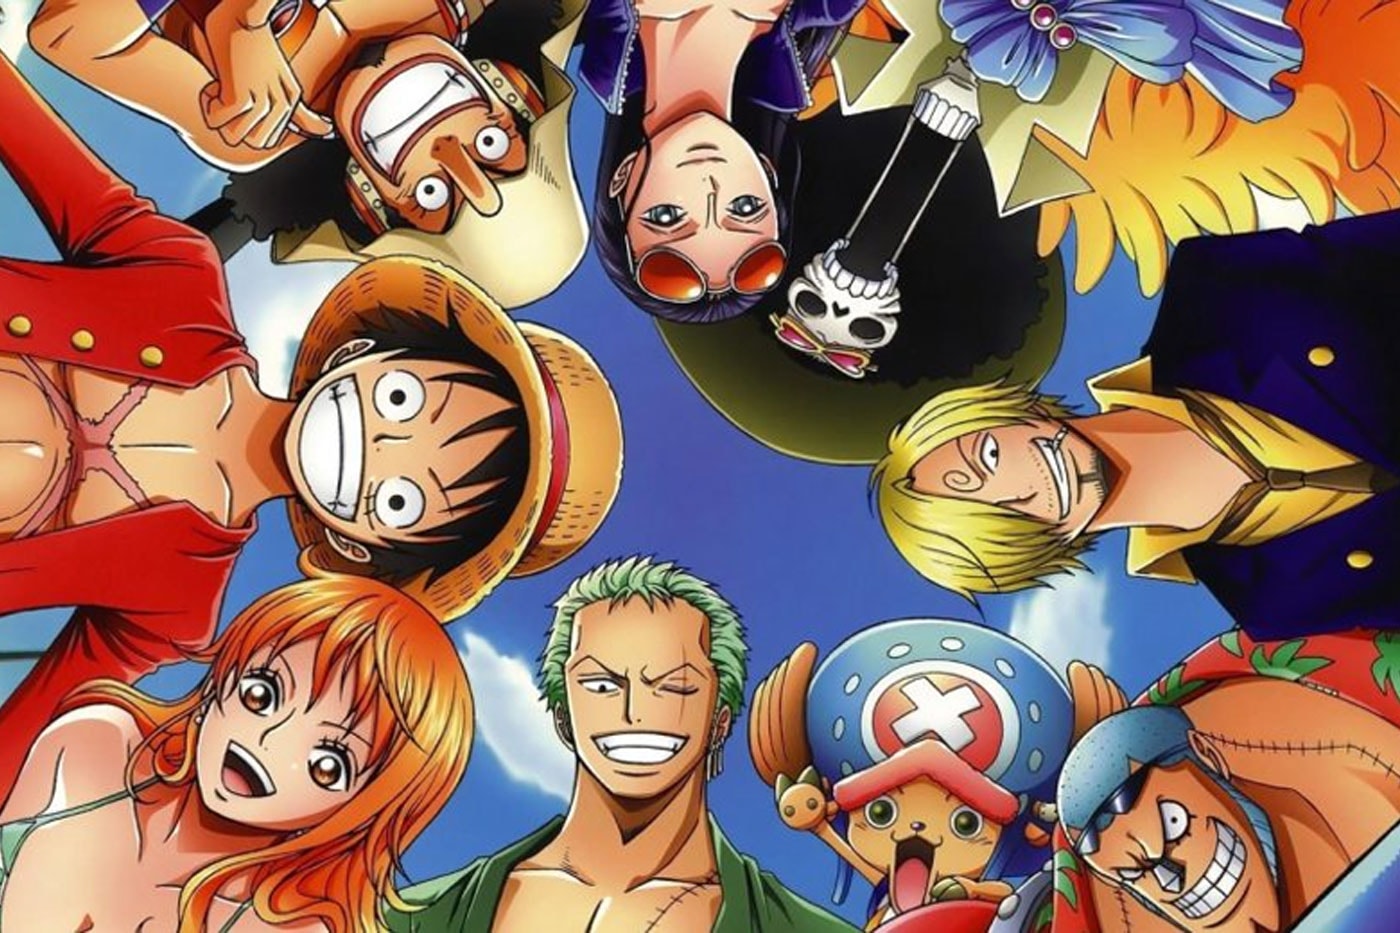 One Piece anime is now available on Netflix, forms big 3